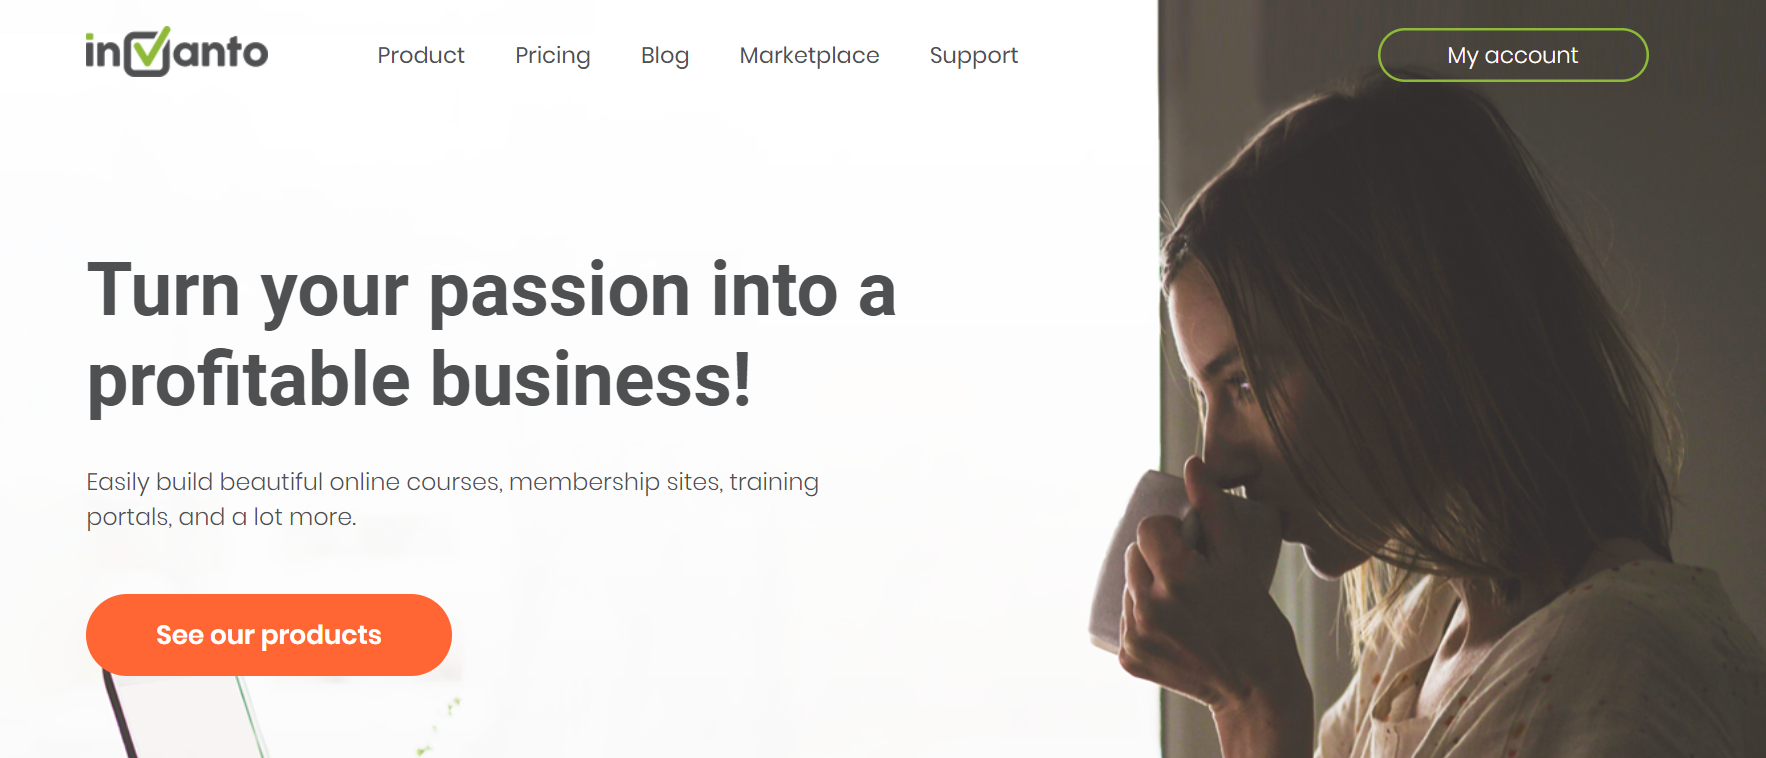 Invanto Review- All in one solution to build your business